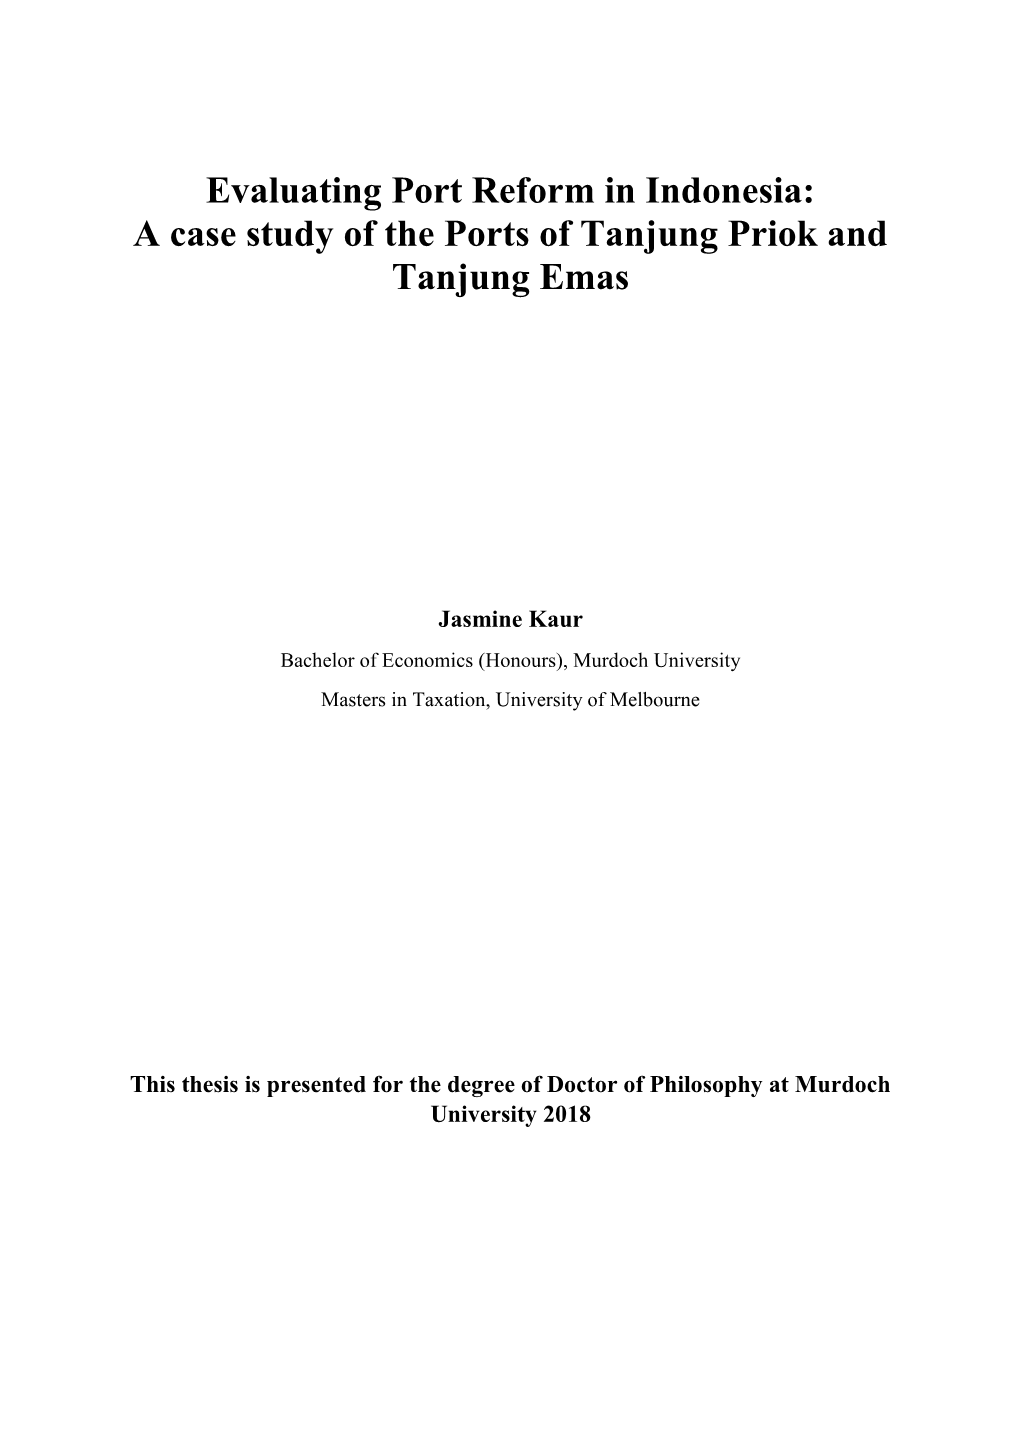 Evaluating Port Reform in Indonesia: a Case Study of the Ports of Tanjung Priok and Tanjung Emas